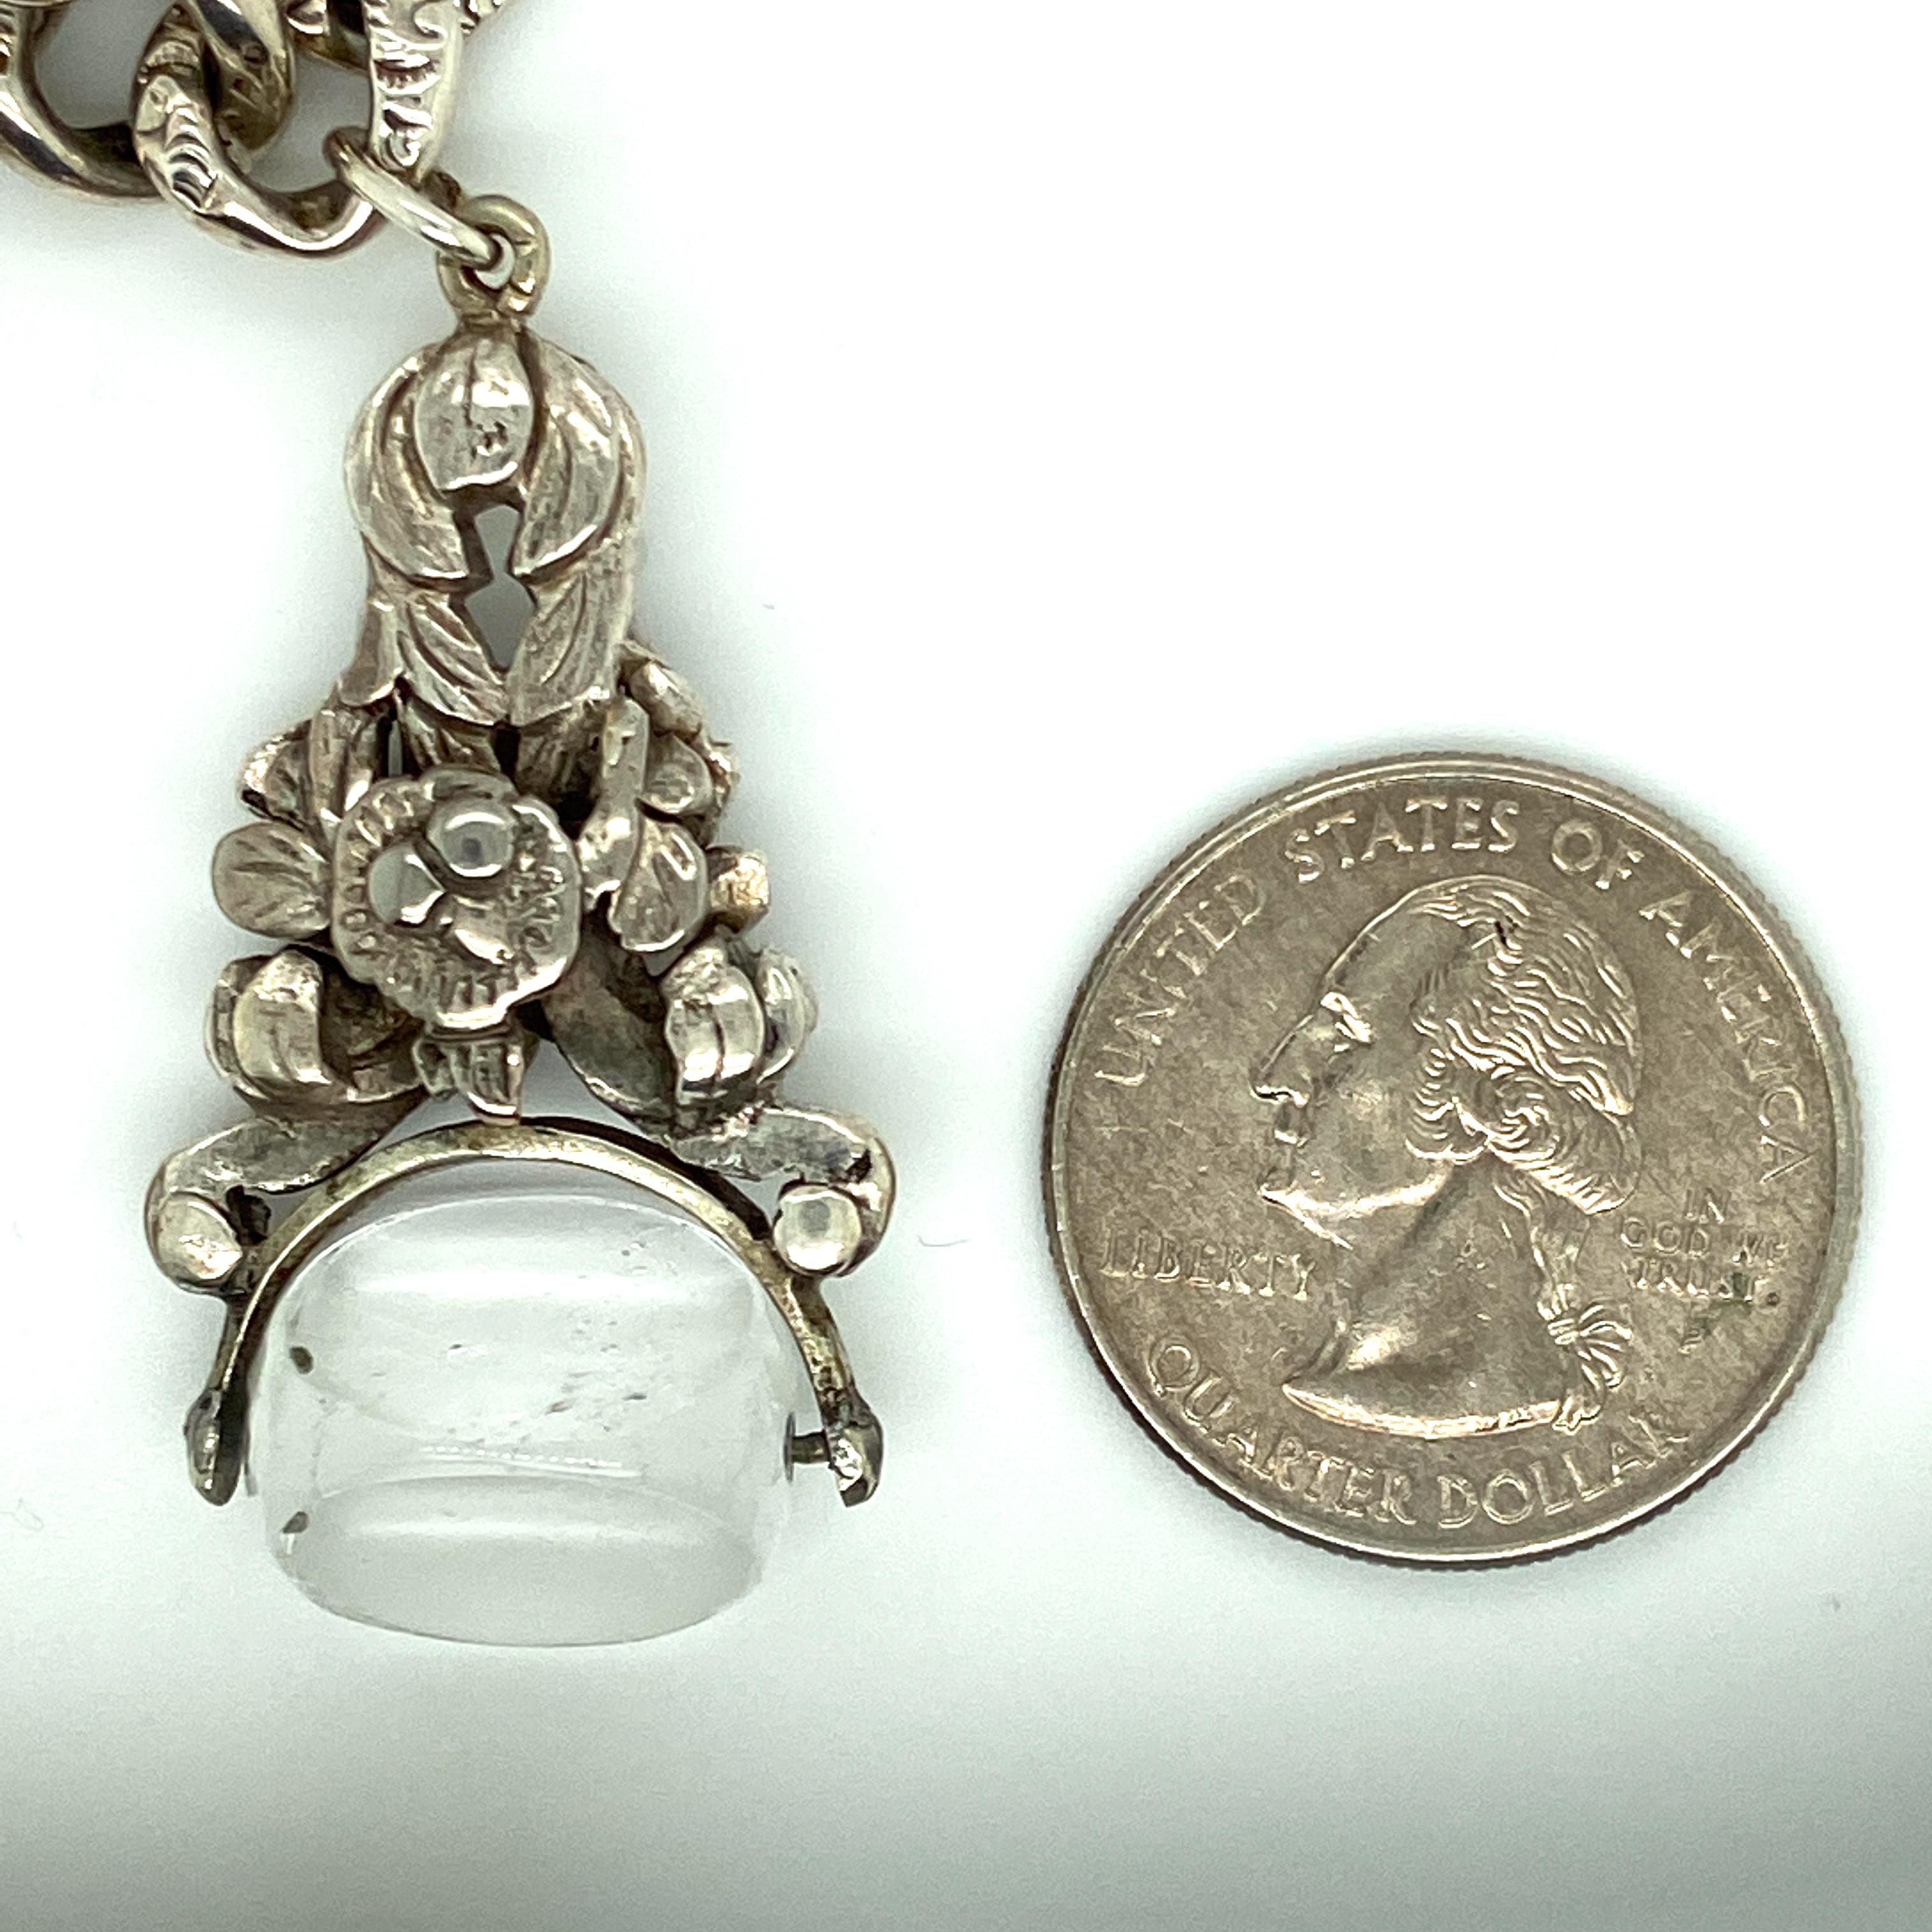 One sterling silver Victorian gate bracelet features engrave links and a three-sided rock crystal quartz watch fob soldered to the bracelet.  The bracelet measures eight inches long. 